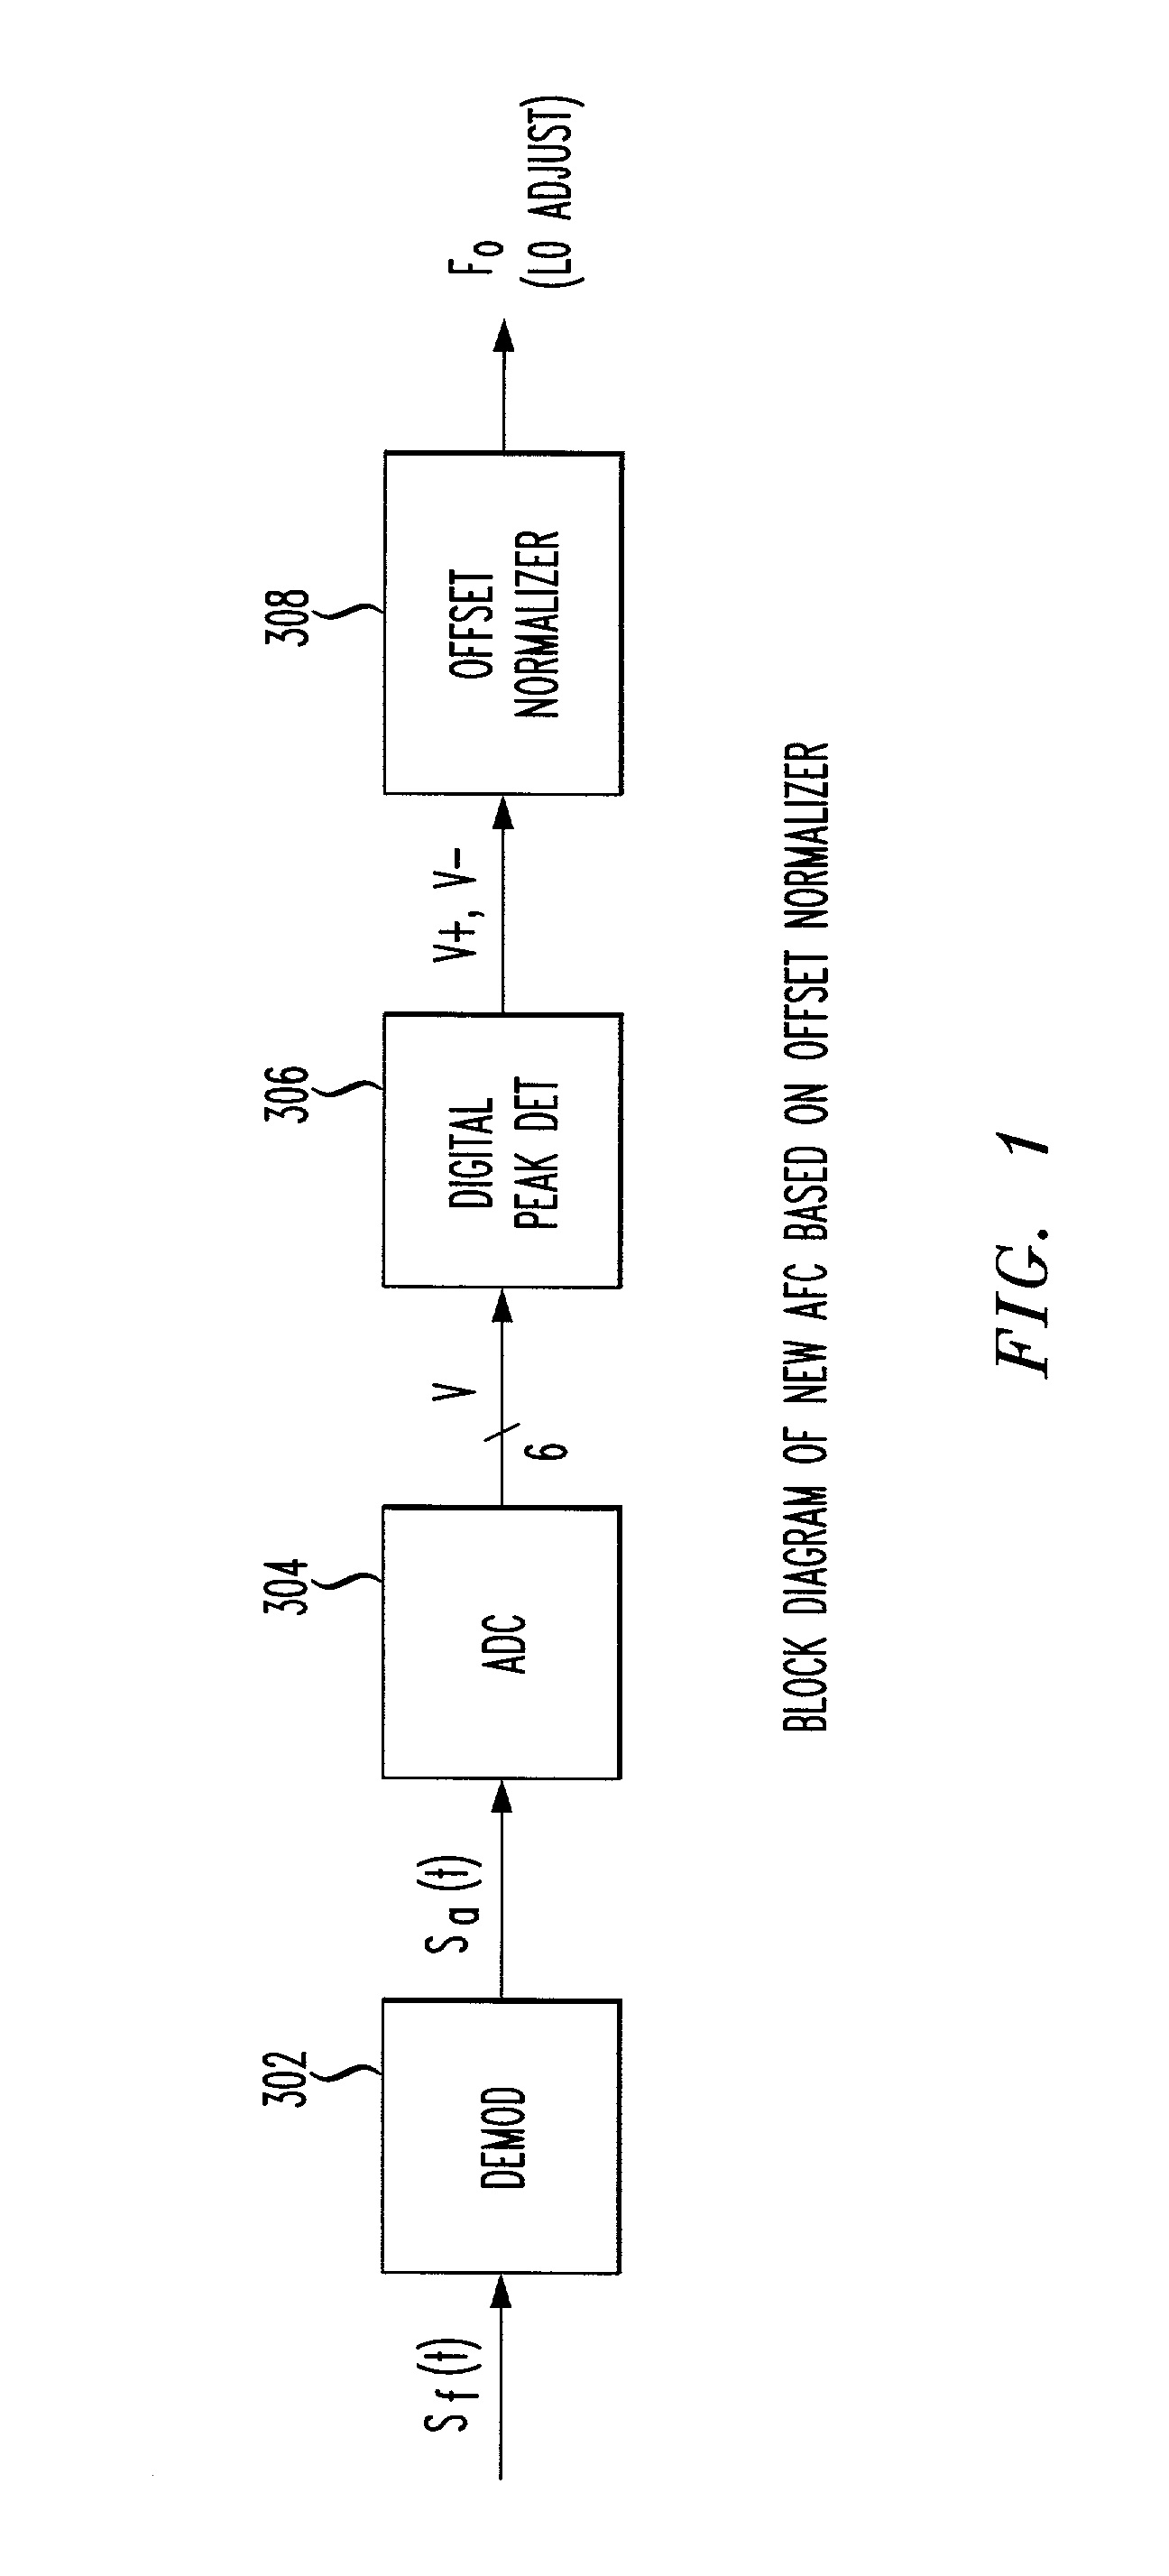 Normalization methods for automatic requency compensation in bluetooth applications